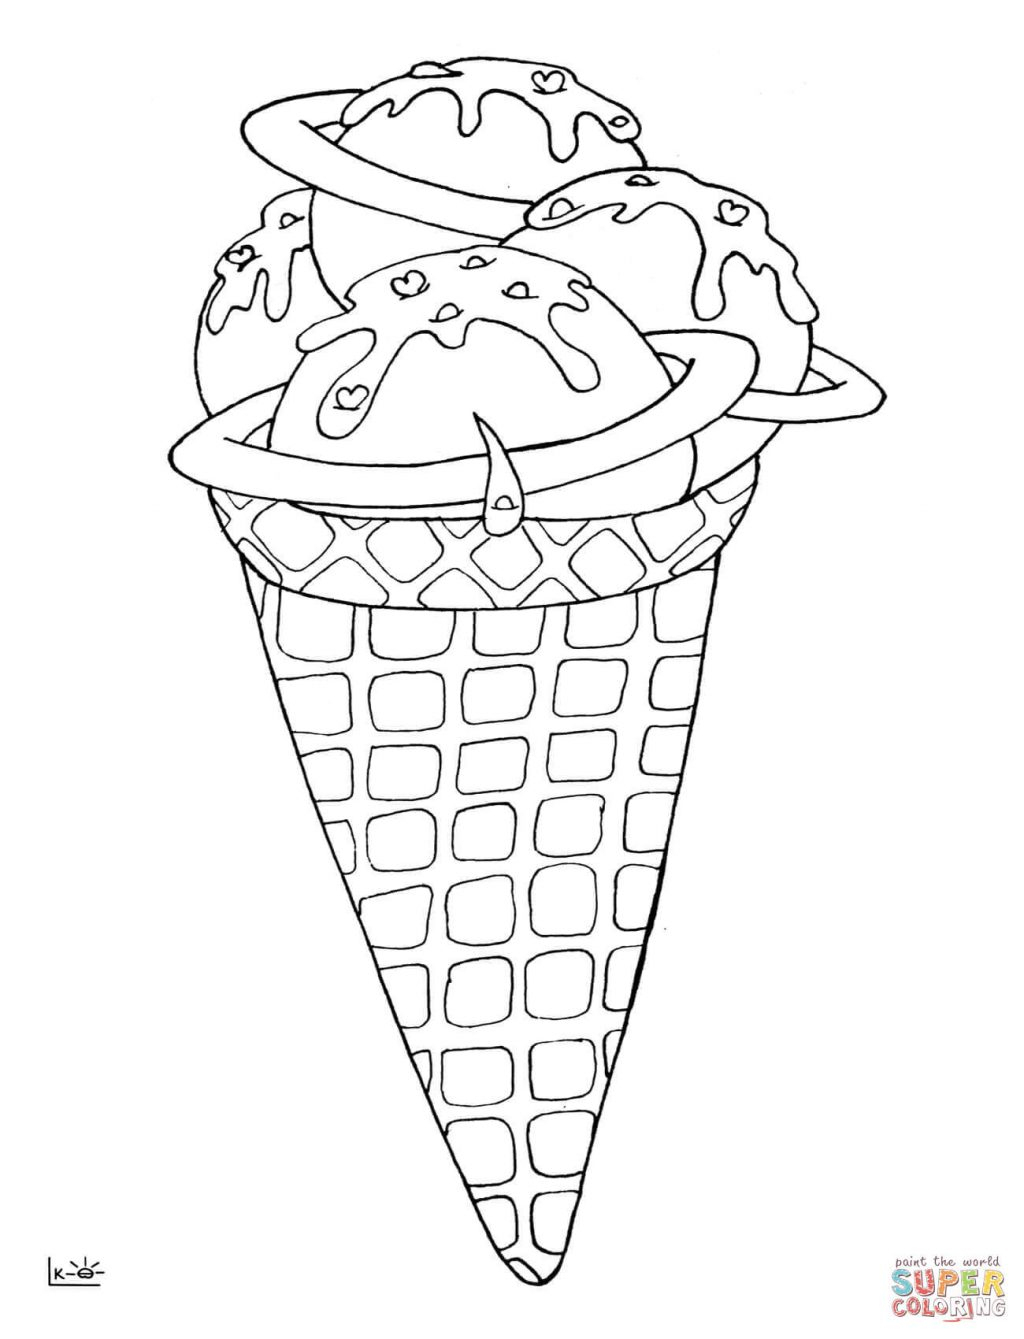 Coloring Pages ~ Ice Cream Cone Coloring Pages For Adults Kids - Ice Cream Cone Template Free Printable